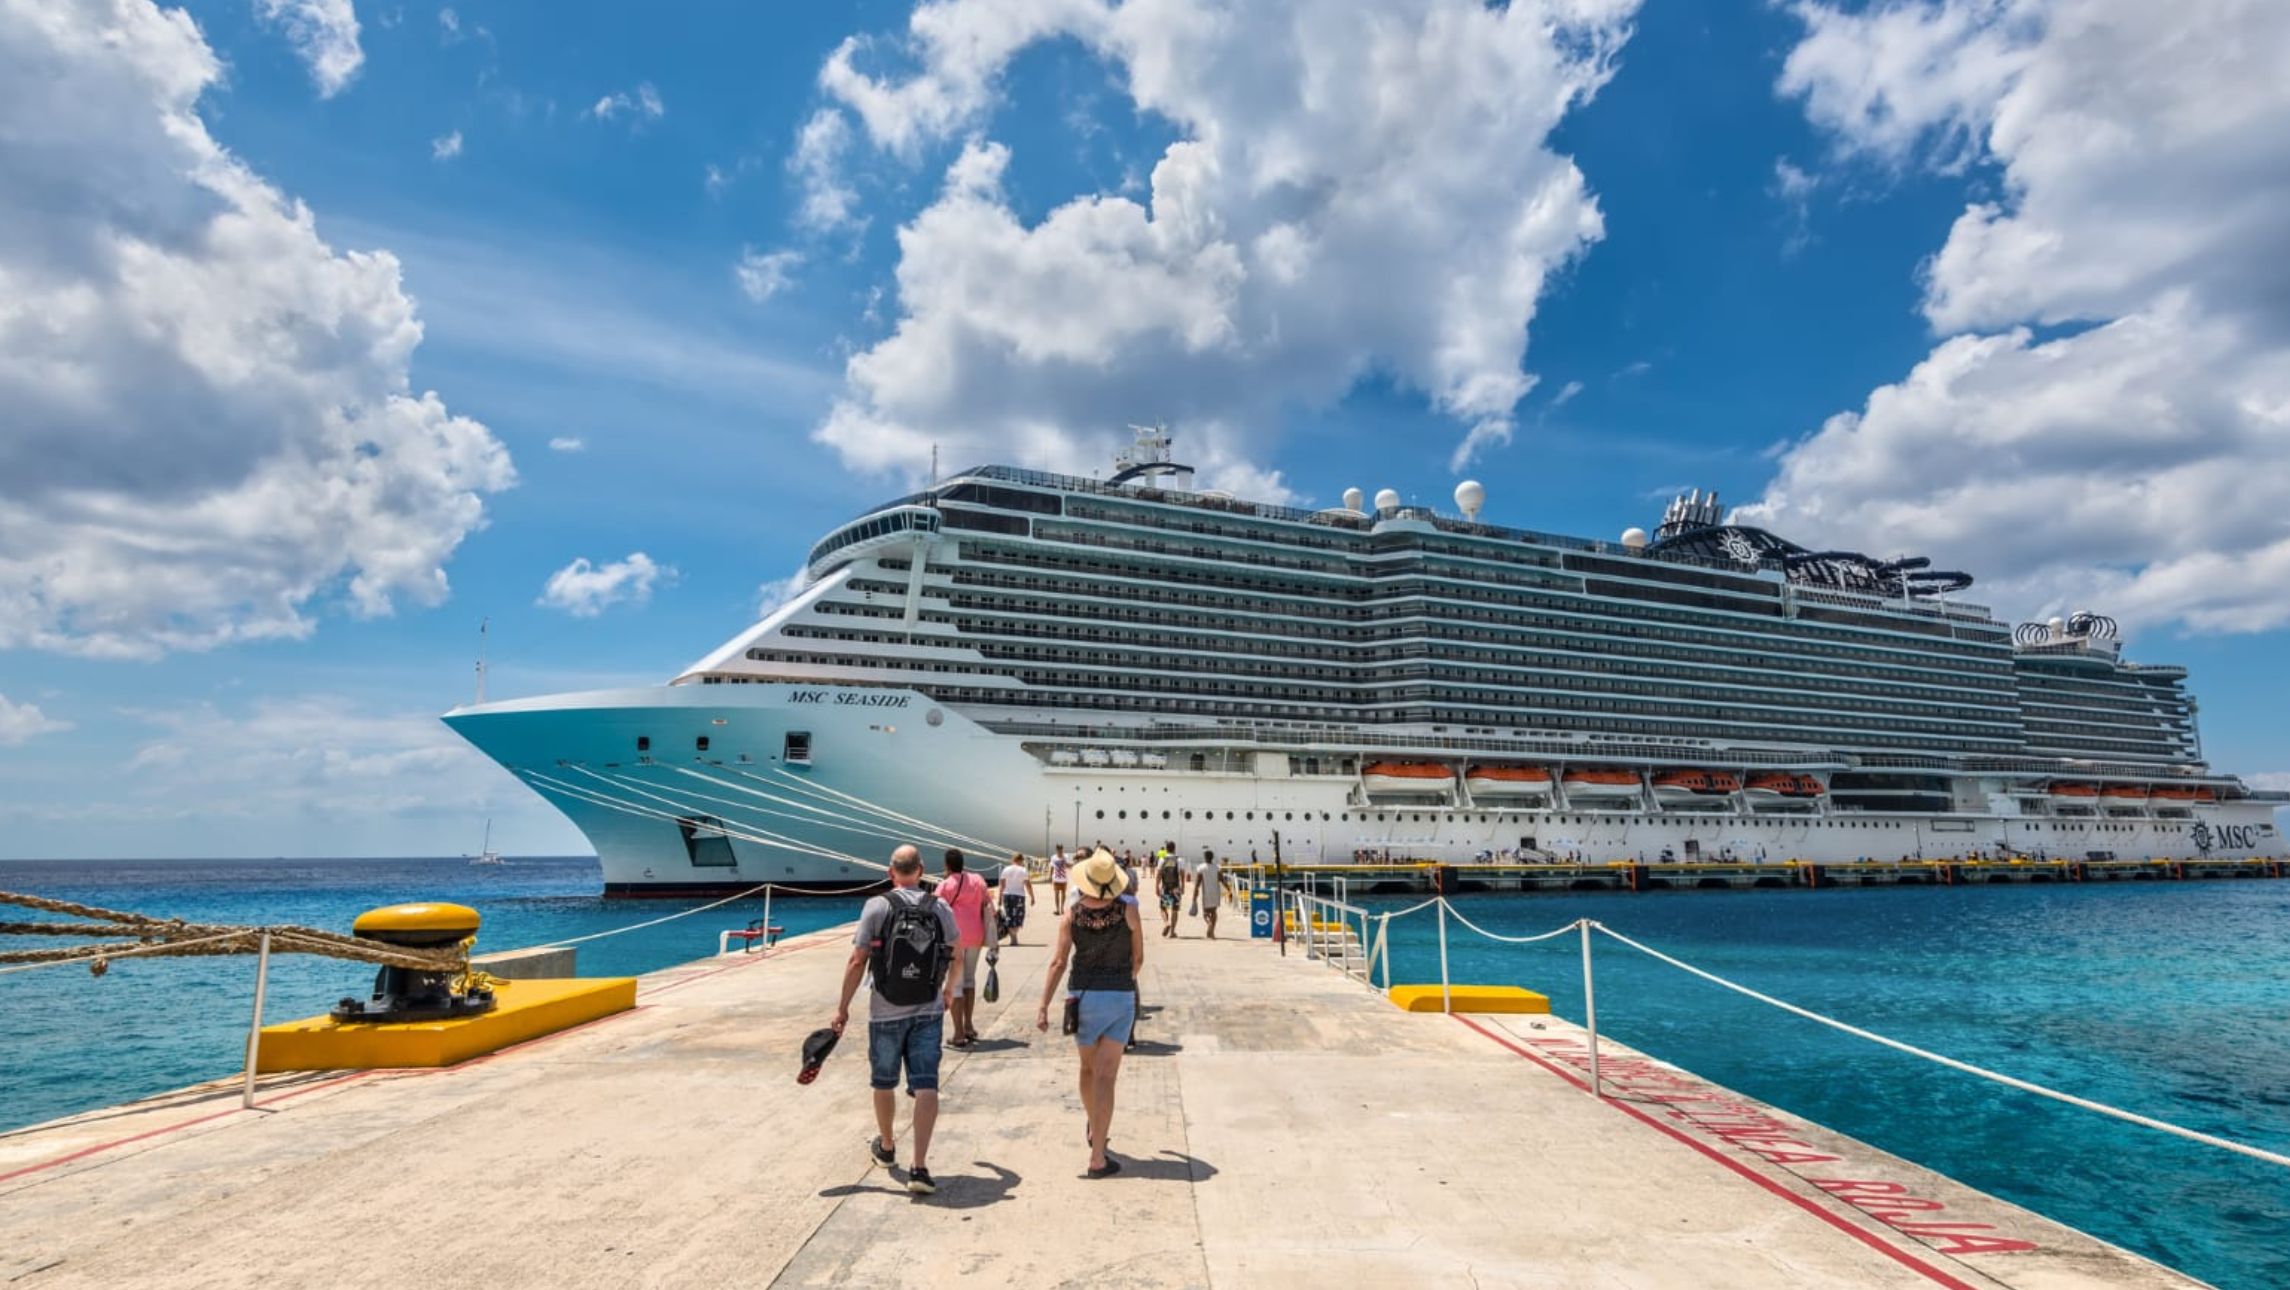 People walking towards a cruise ship in the Caribbean